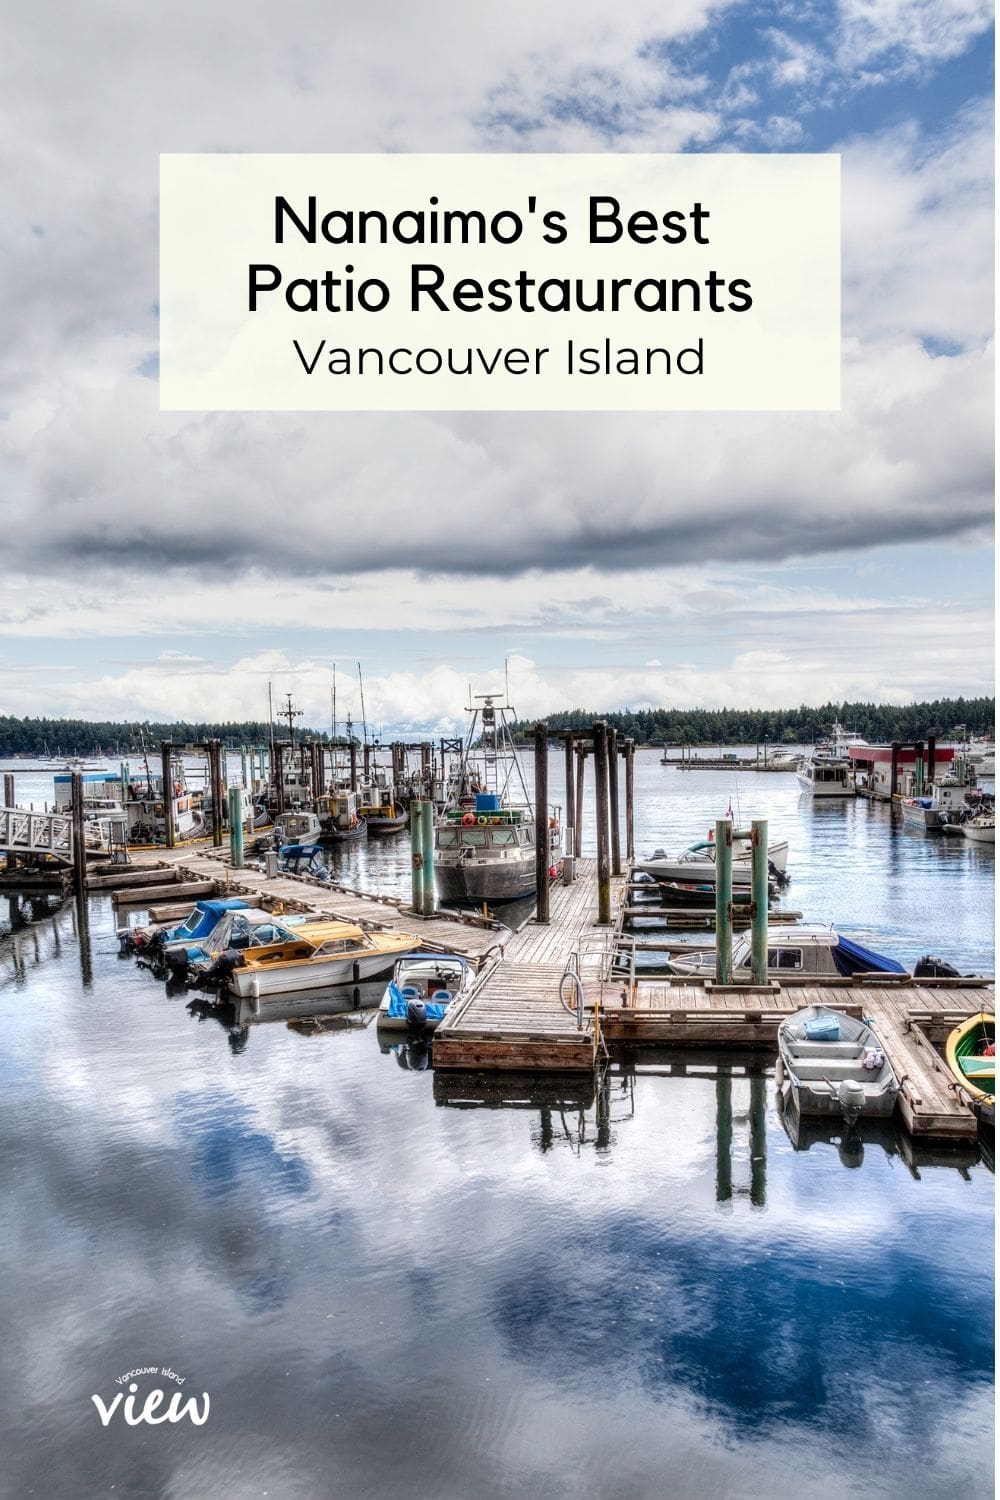 Best patio restaurants in Nanaimo. Vancouver Island View